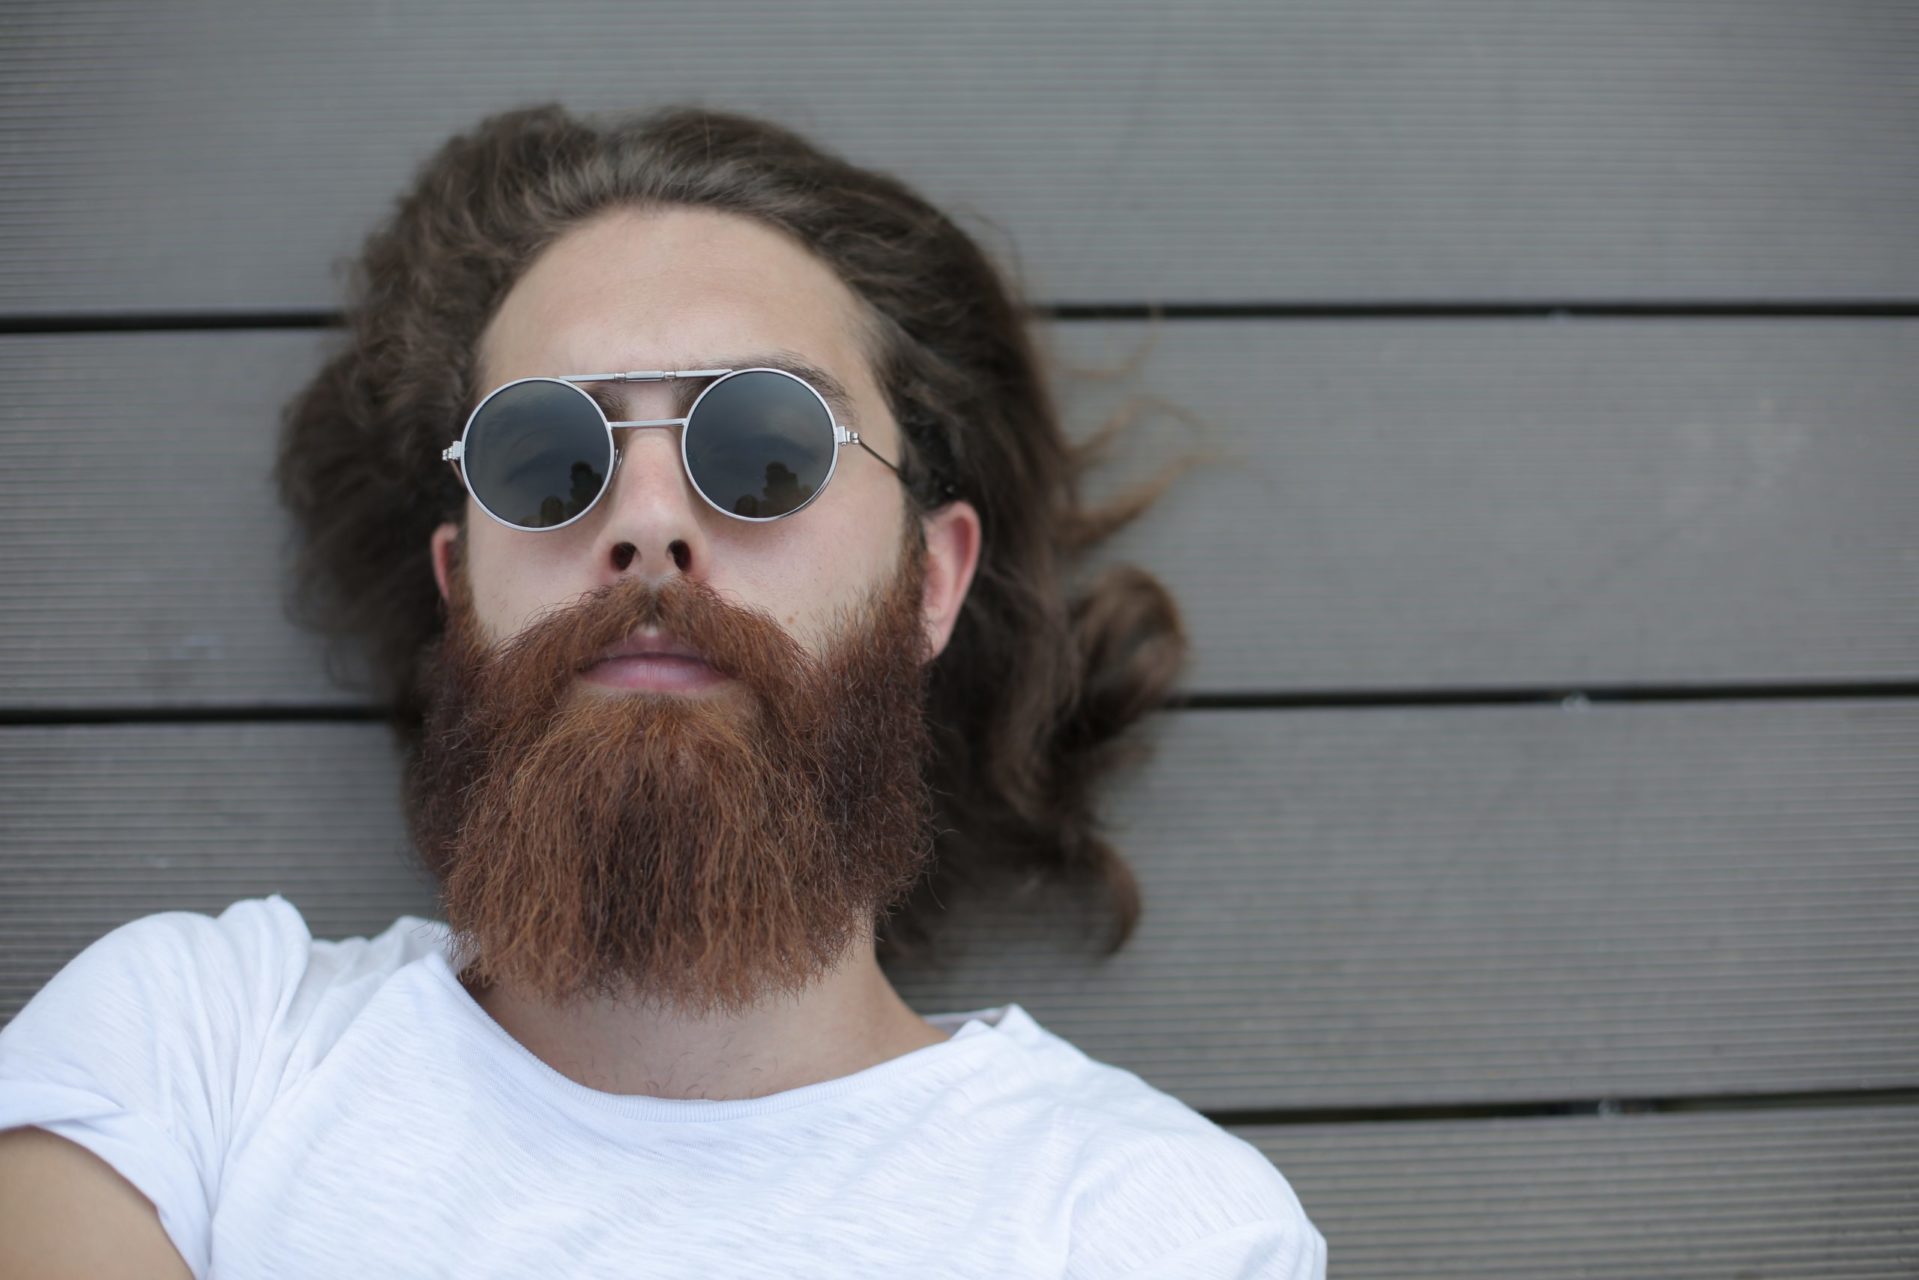 Man with mustache and beard wearing sunglasses.